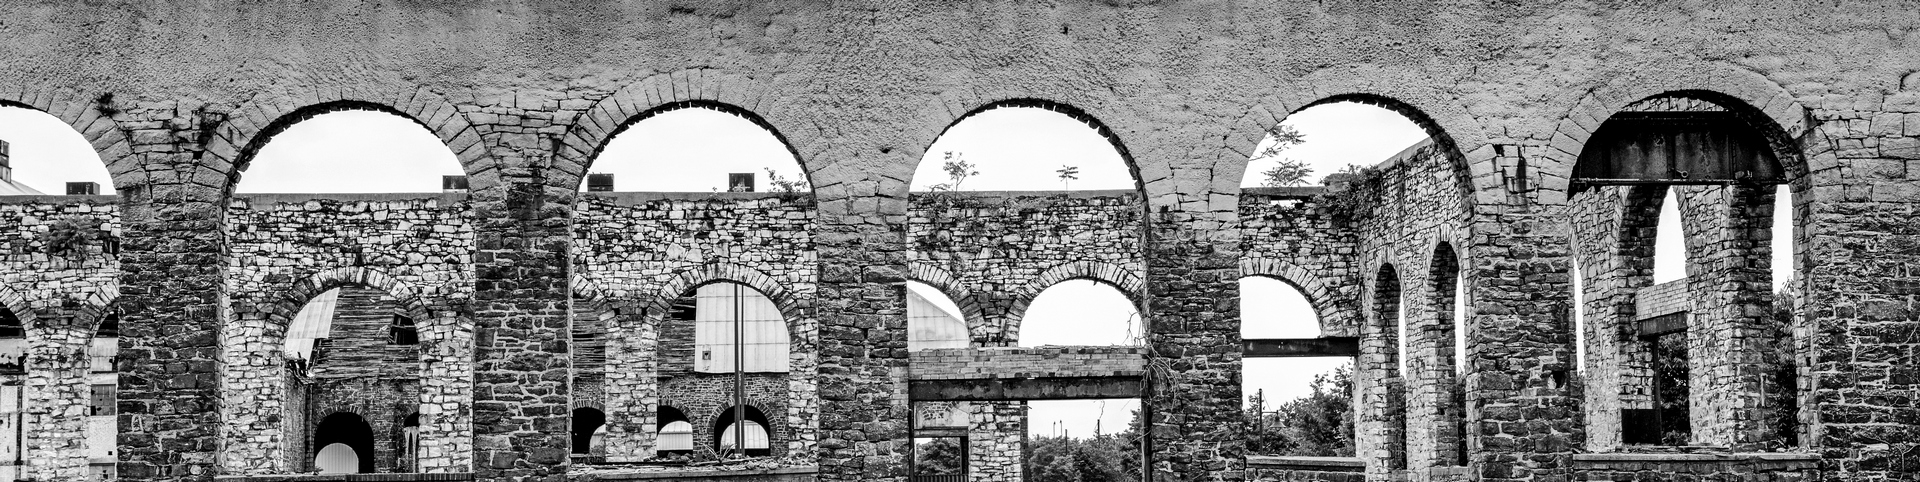 Bethlehem Steel Arches by Jerry Snyder